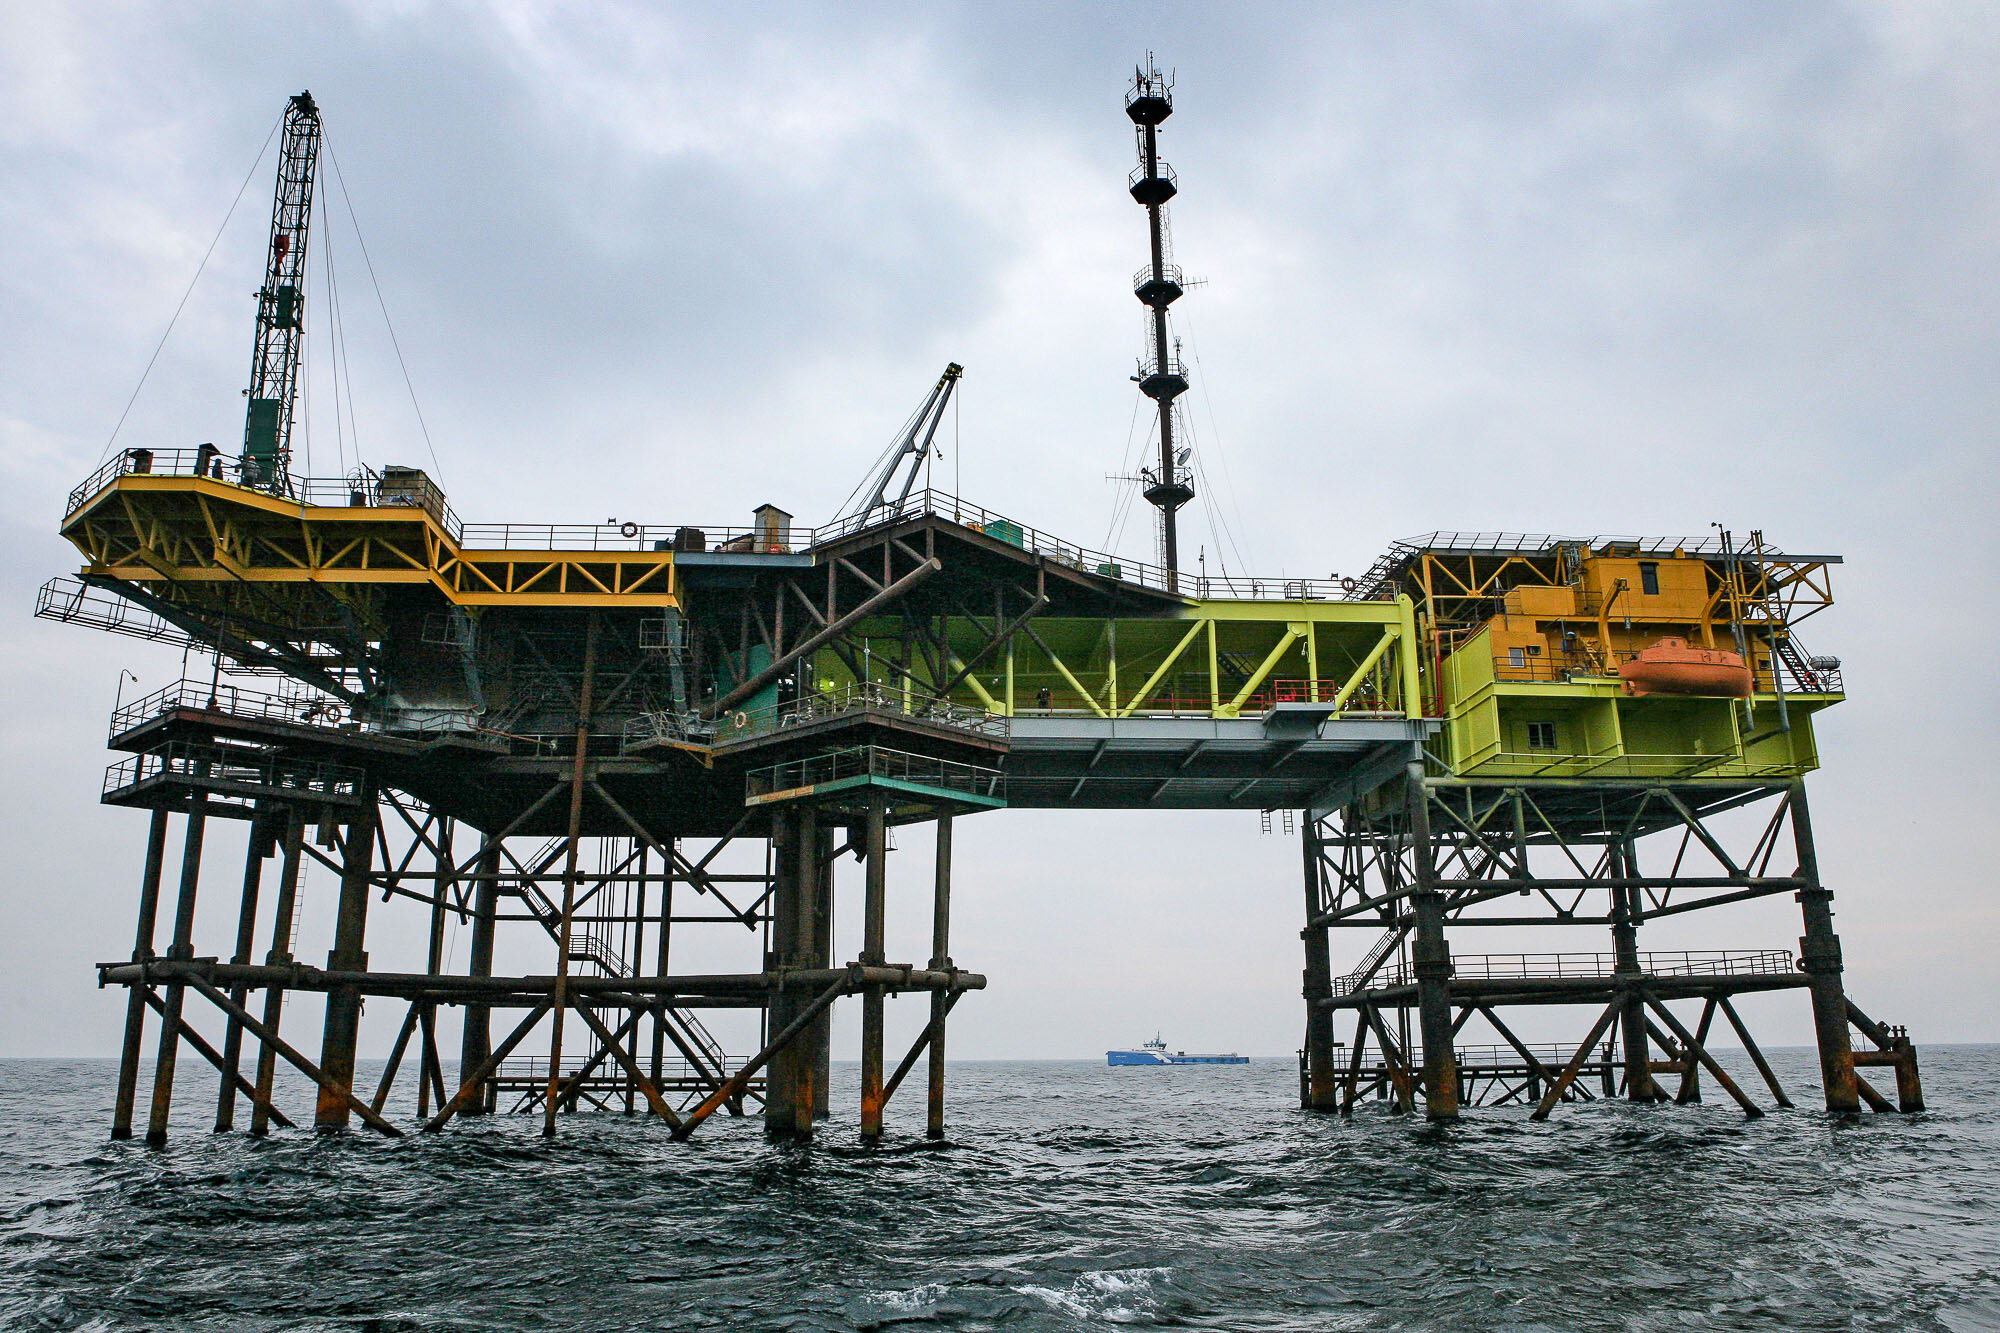 Ukraine loses out on Black Sea’s rich natural gas supply